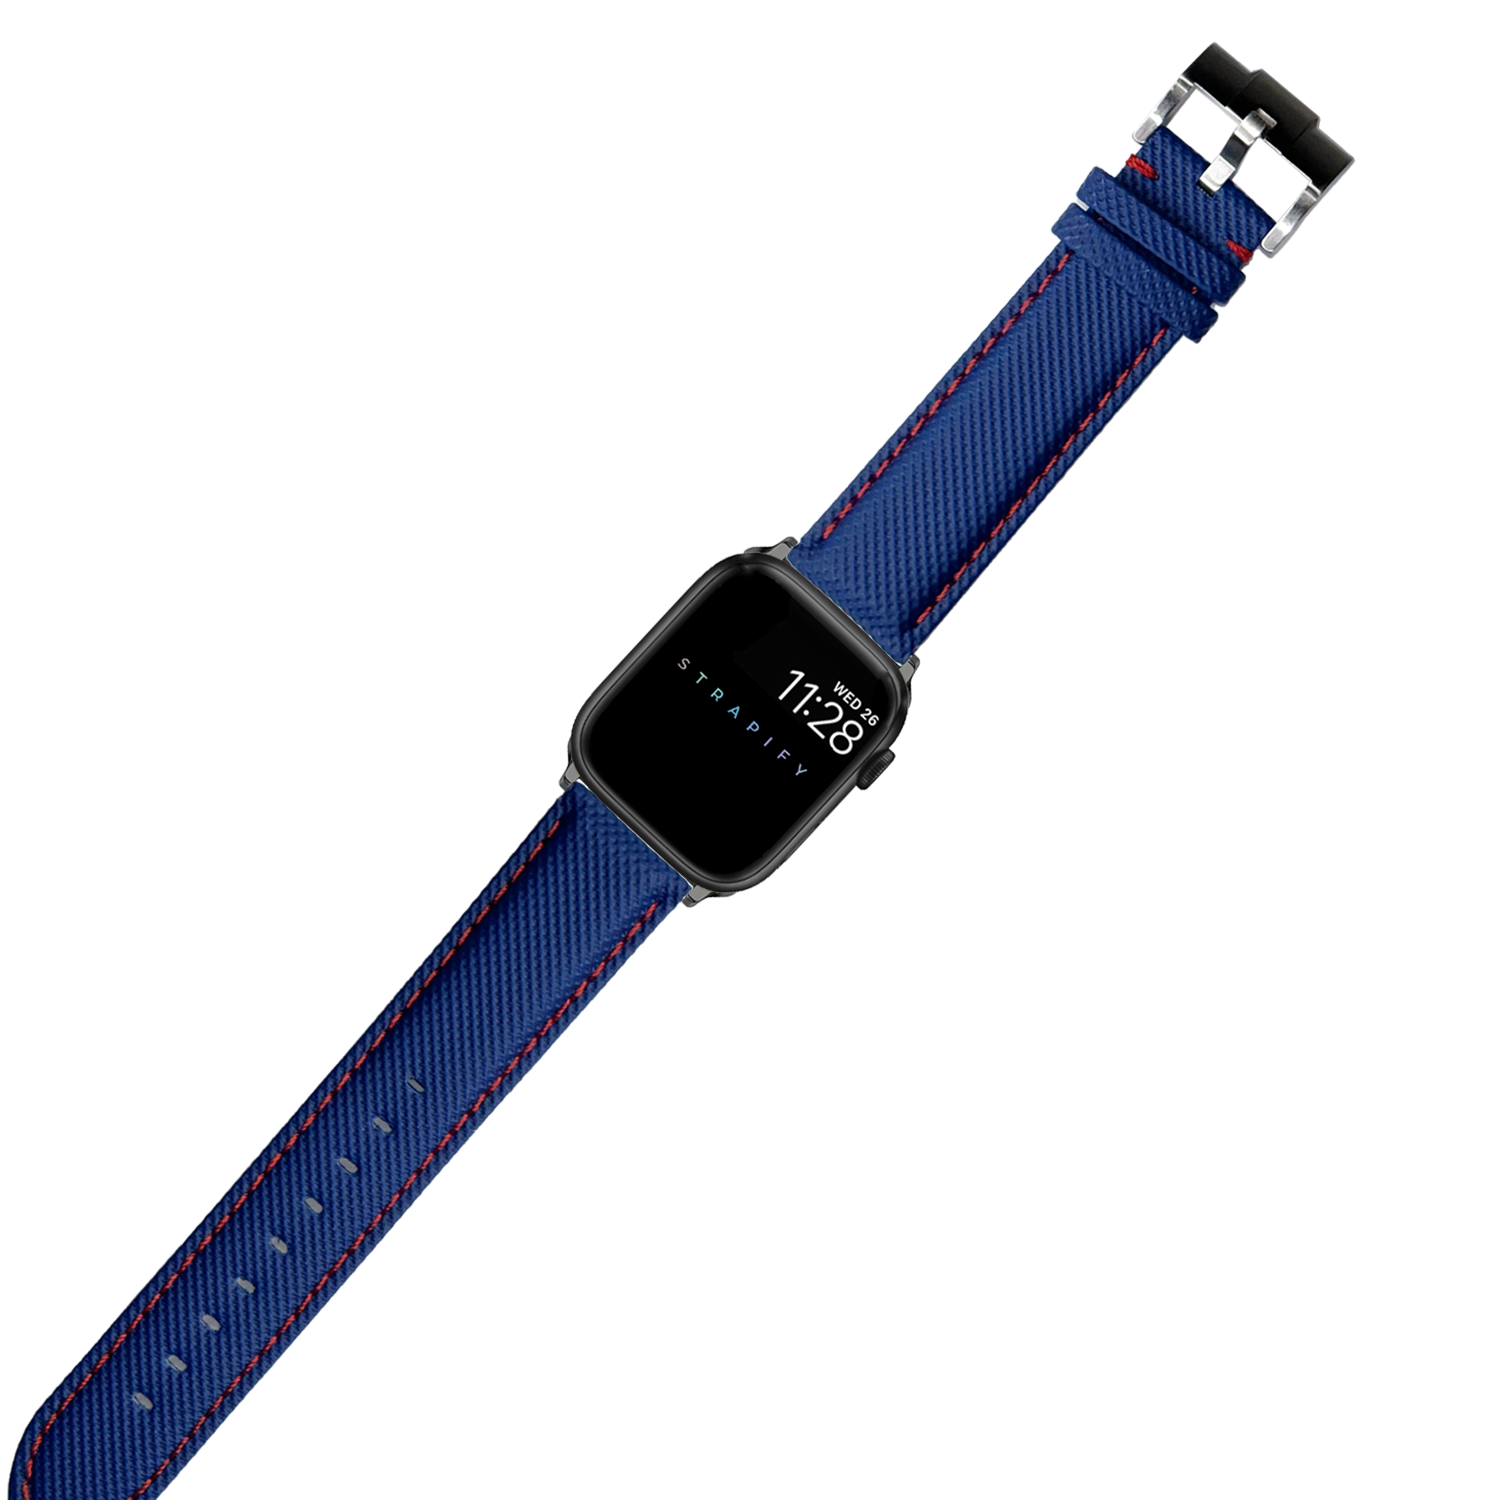 [Apple Watch] Sailcloth - Electric Blue | Red Stitching